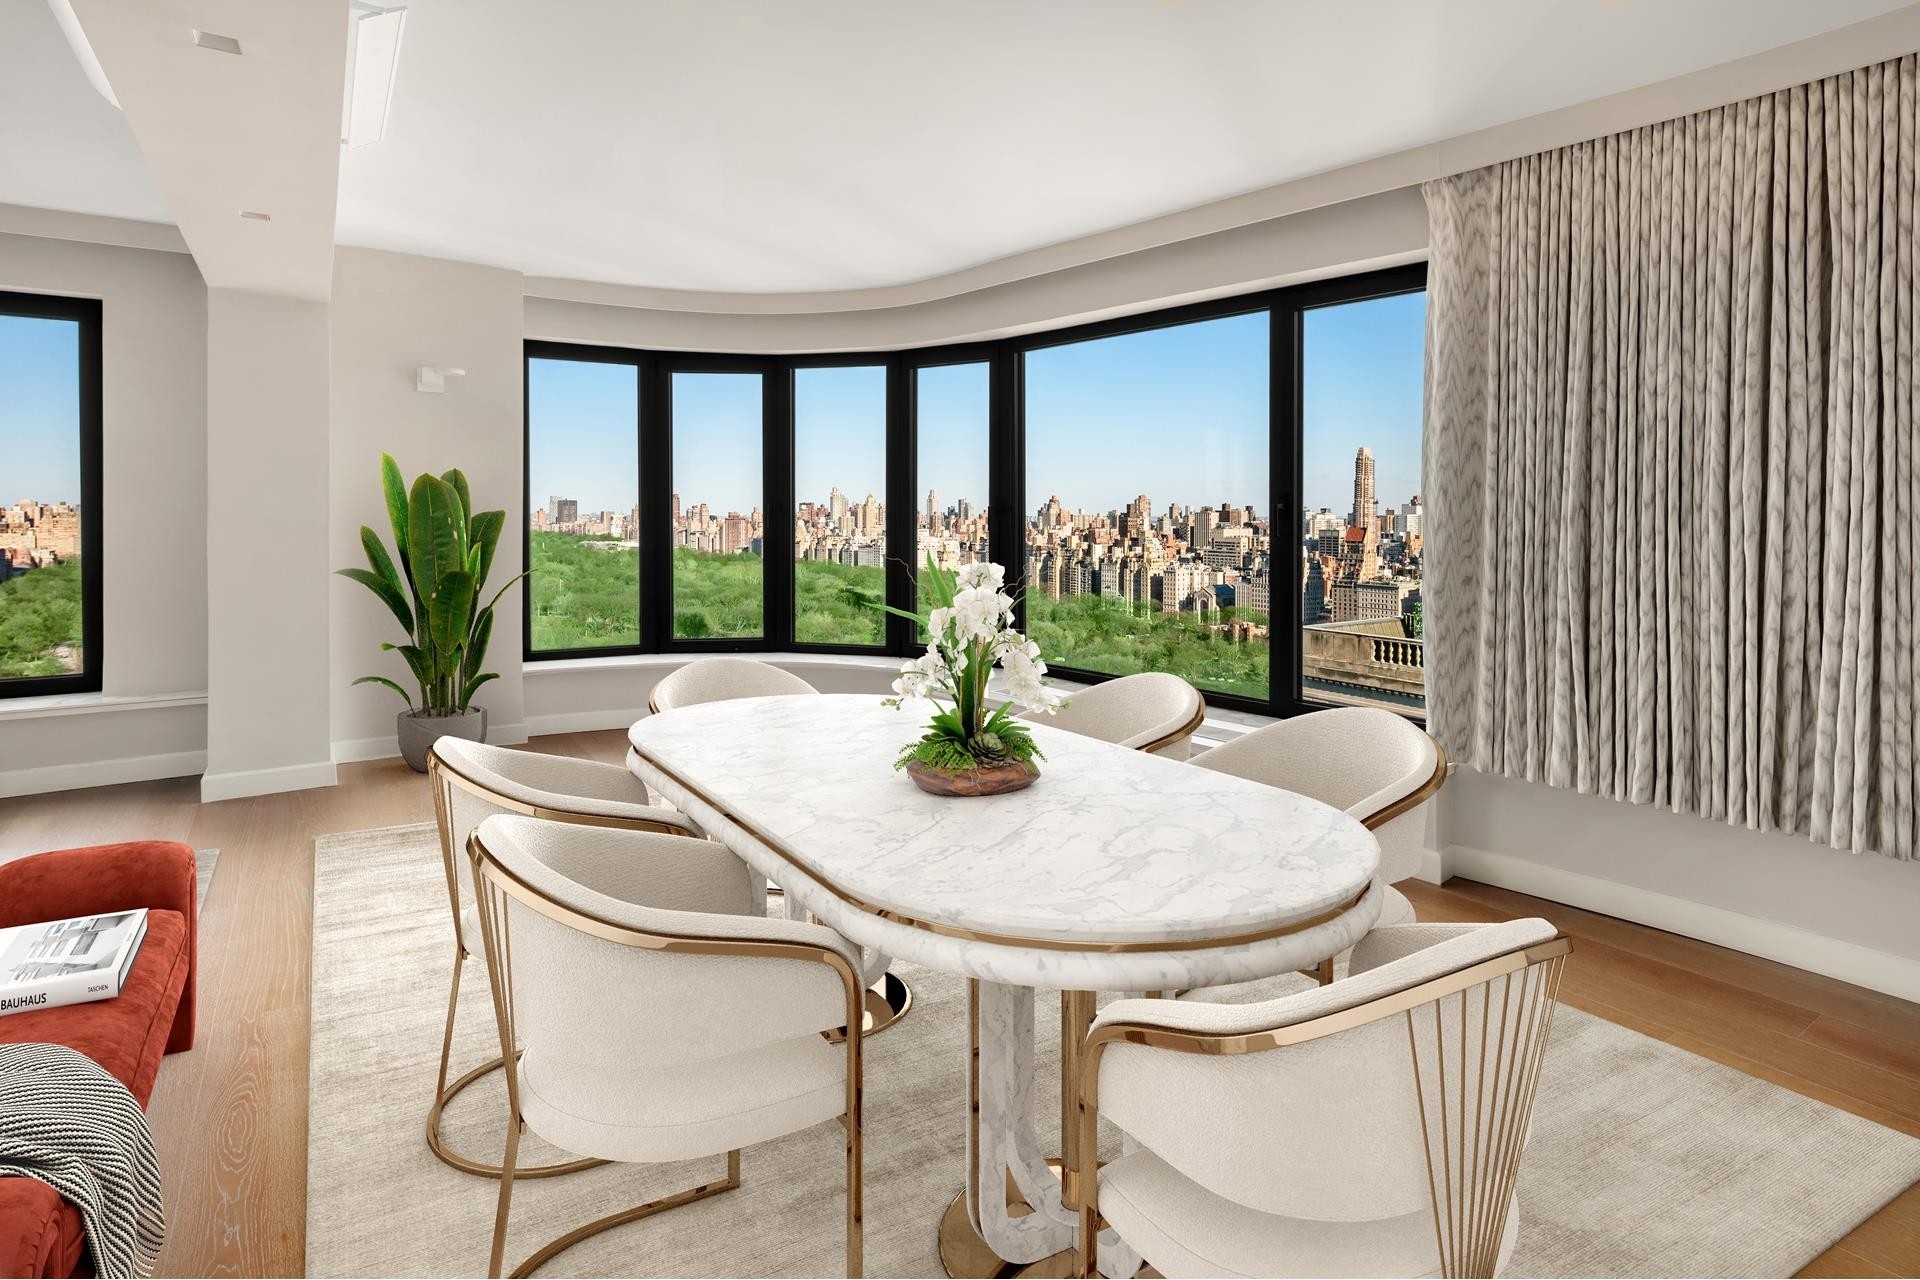 Co-op Properties for Sale at 200 CENTRAL PARK S, 35A Central Park South, New York, NY 10019